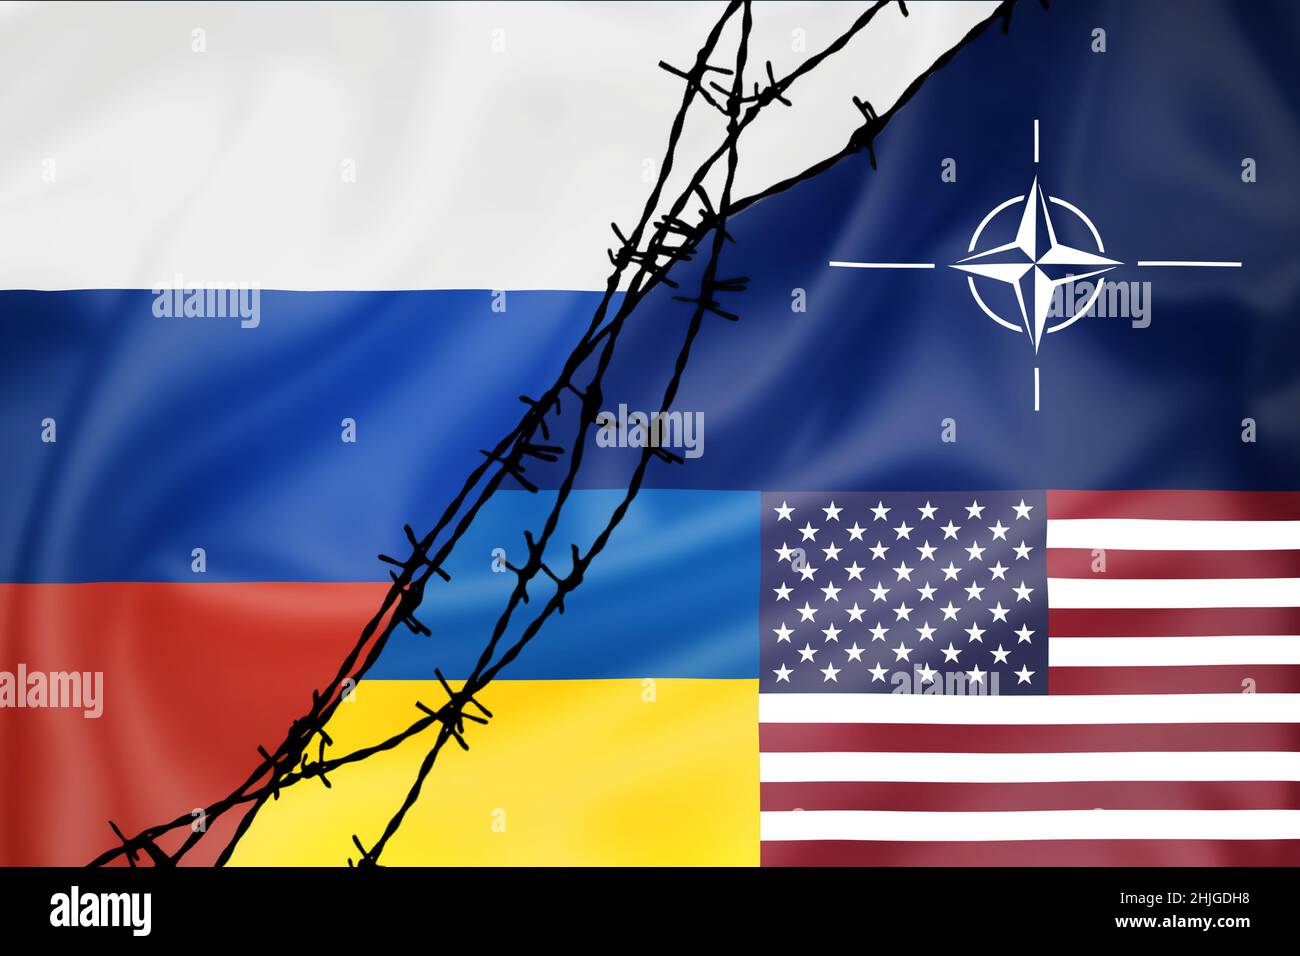 Silk flags of Russian Federation, NATO, USA and Ukraine divided by barb wire illustration, concept of tense relations between west and Russia Stock Photo